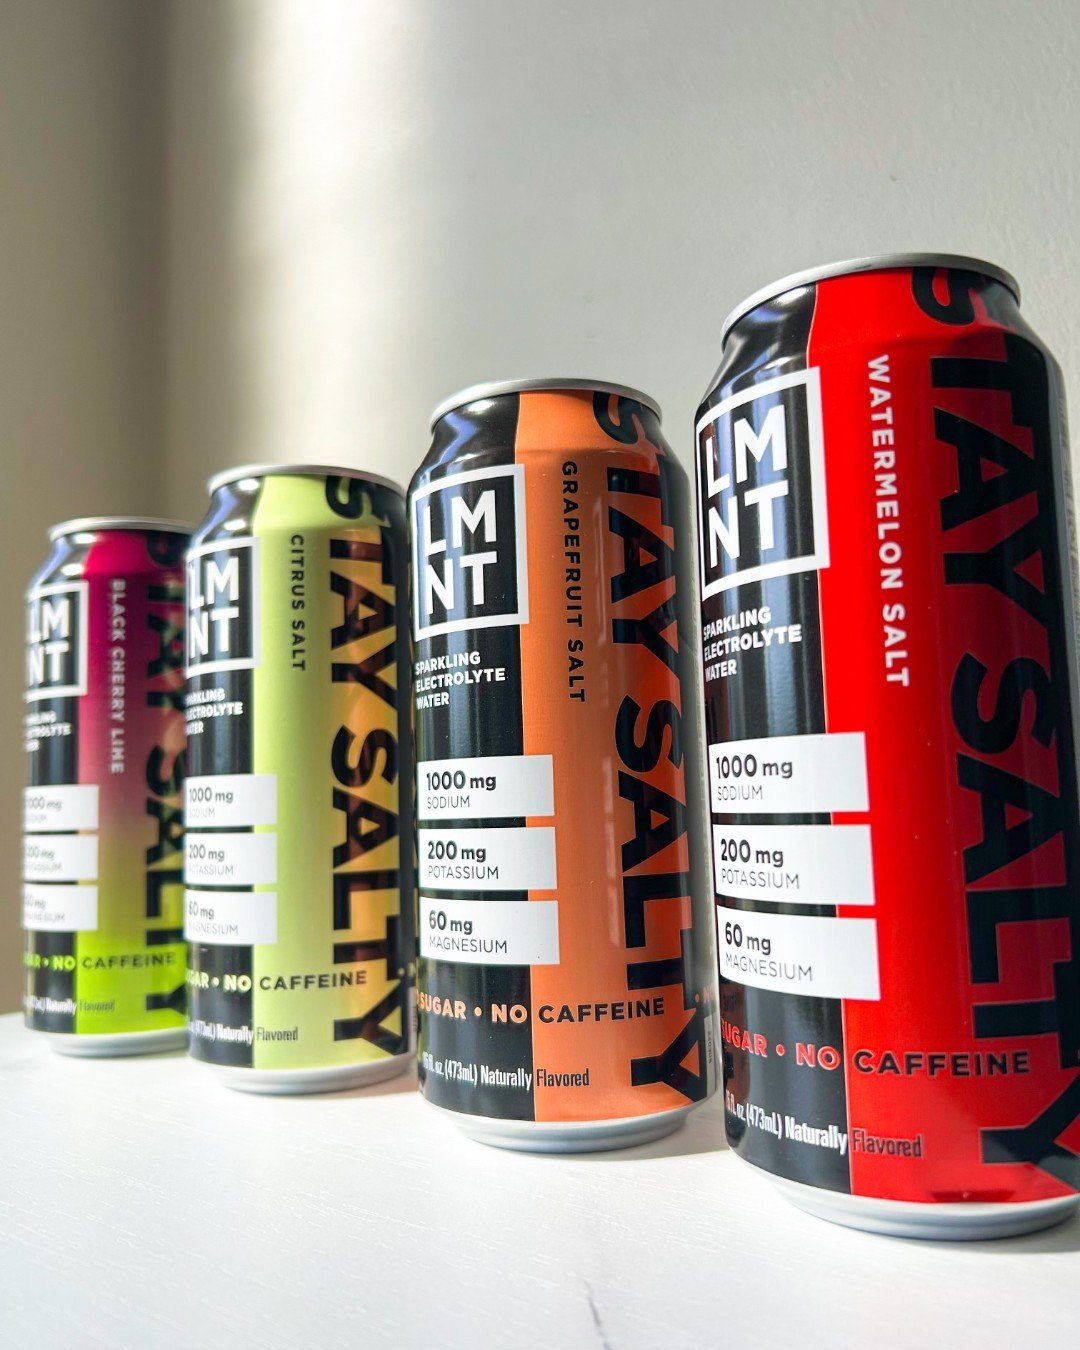 ICYMI: LMNT sparkling is now offered at @j.b.wellness ⚡

@drinklmnt just launched an amazing sparkling drink formulated to help anyone with their electrolyte needs + is perfectly suited to those fasting or following a low-carb, whole food diet.

stop